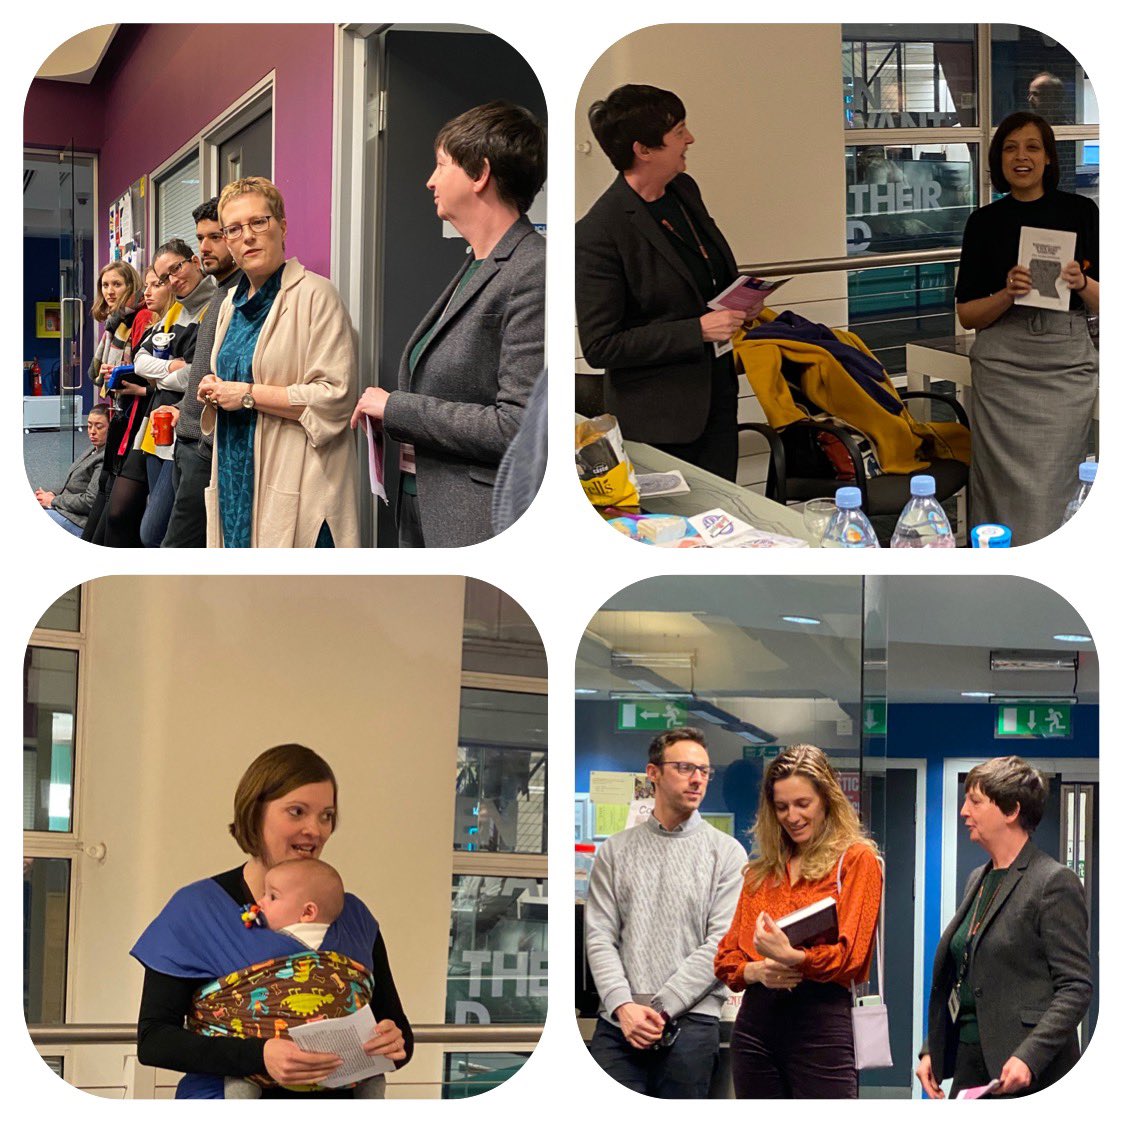 A quartet of great books launched tonight at the lab introduced by @allisonl and written by @cognitiveloop @shelleuk @digiteracy and @kayle10 on behalf of @CareyJewitt and @IN_TOUCH_UCL